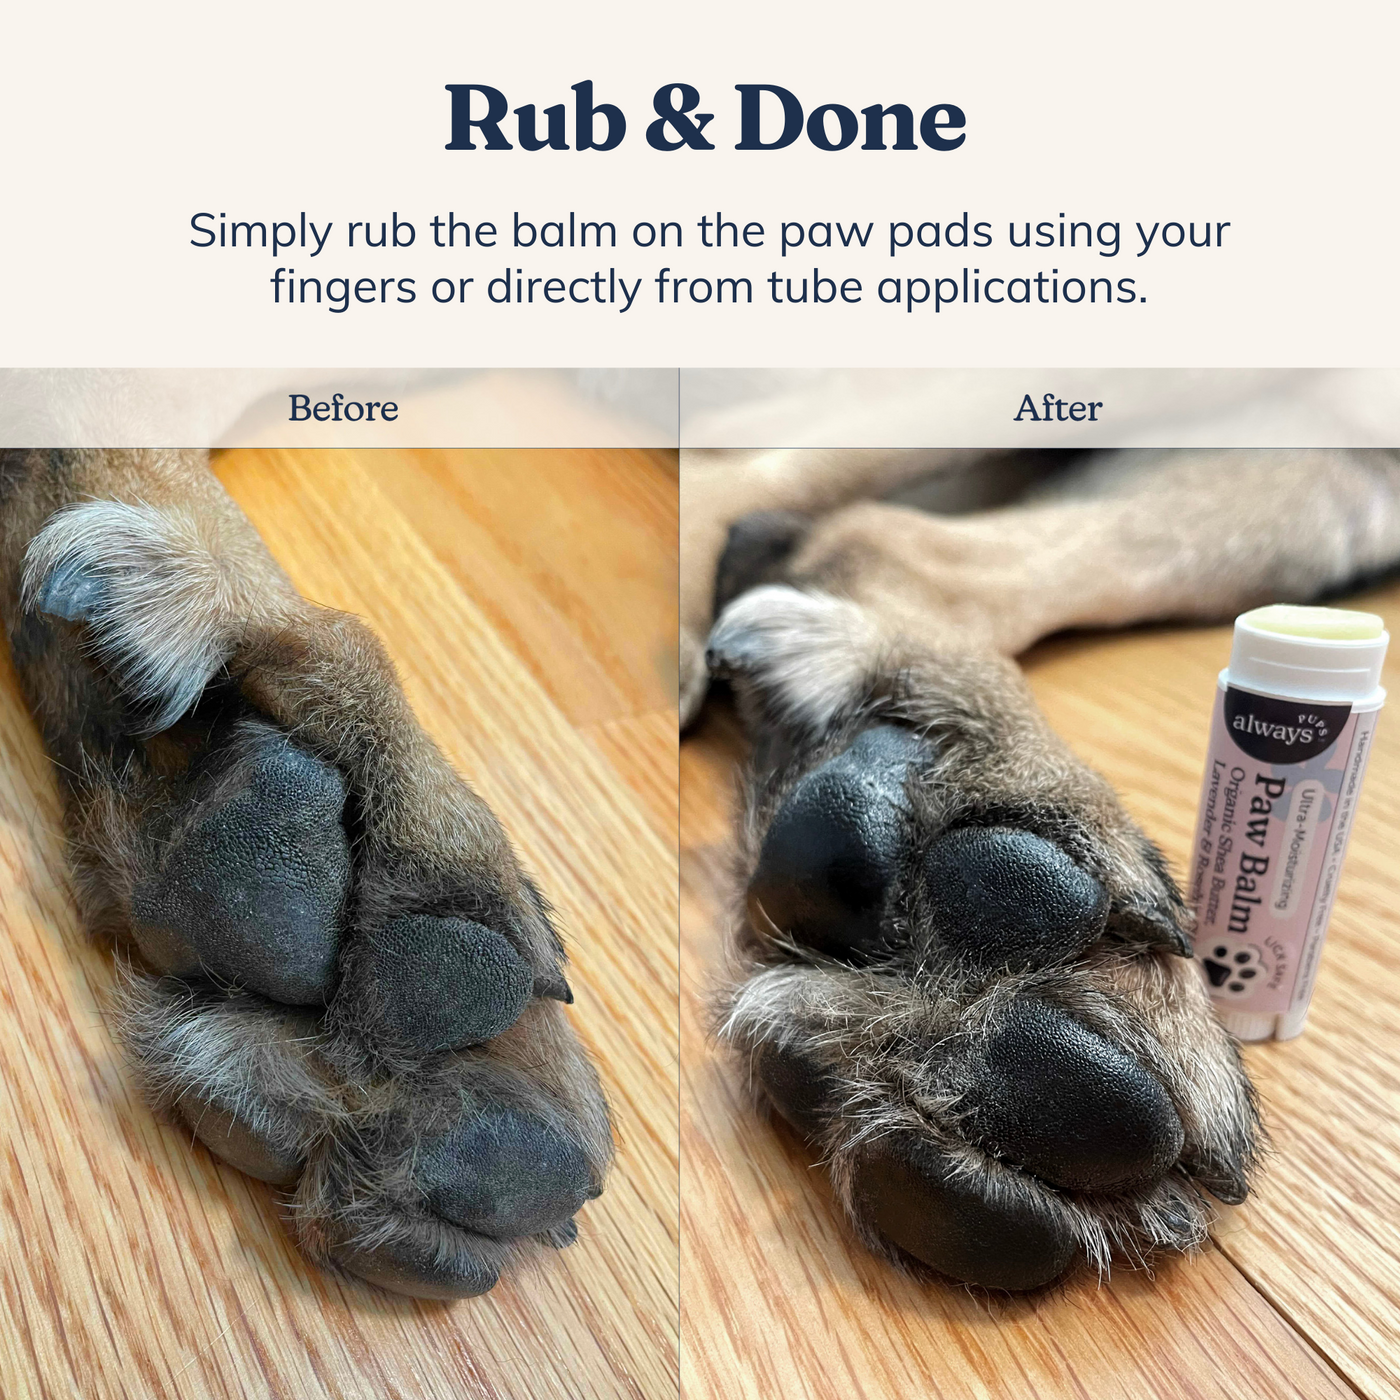 Ultra Moisturizing All Natural & Organic Paw Balm for Dogs – alwayspups